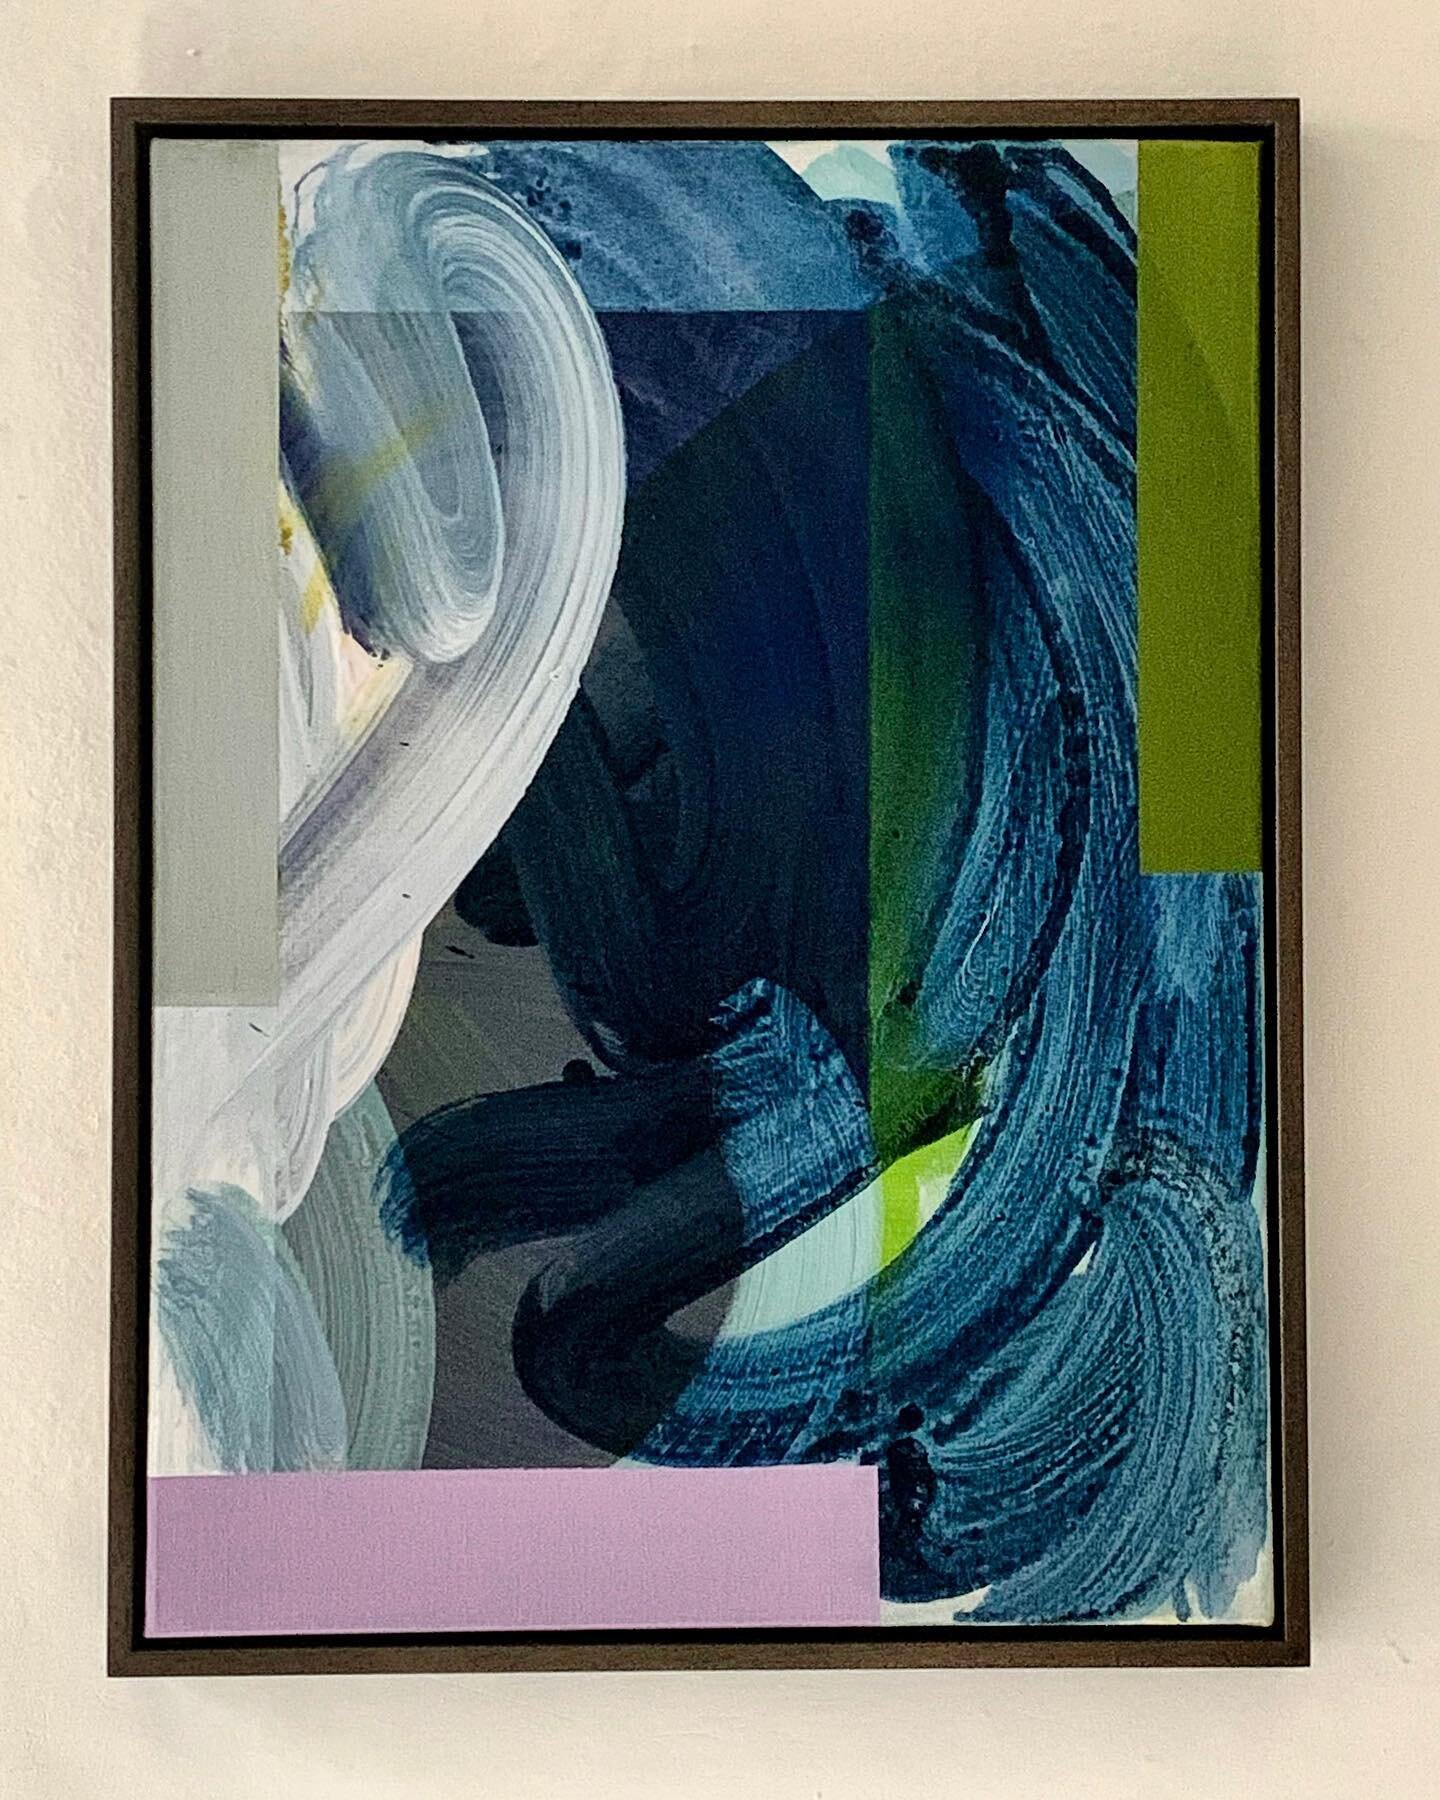 Great to see this one beautifully framed by @dylanshiptonframes.
Seedbomb, 2021
Acrylic paint on linen.
46 x 61 cm
.
#dylanshiptonframes #frames #painting#paintingoncanvas #trayframestained